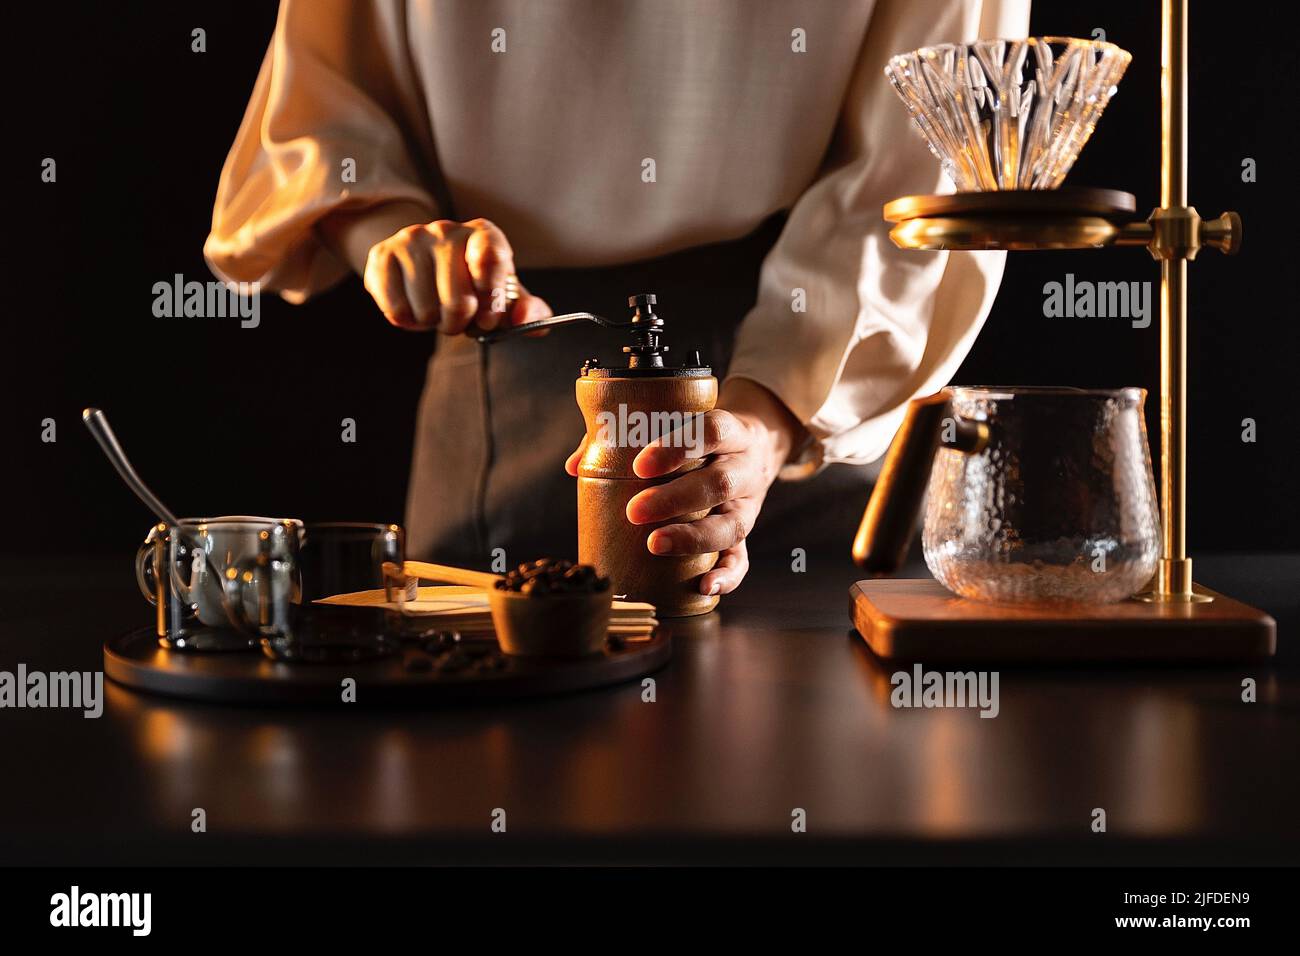 Grinding coffee beans, barista making handcrafted artisan coffee - stock photo Stock Photo